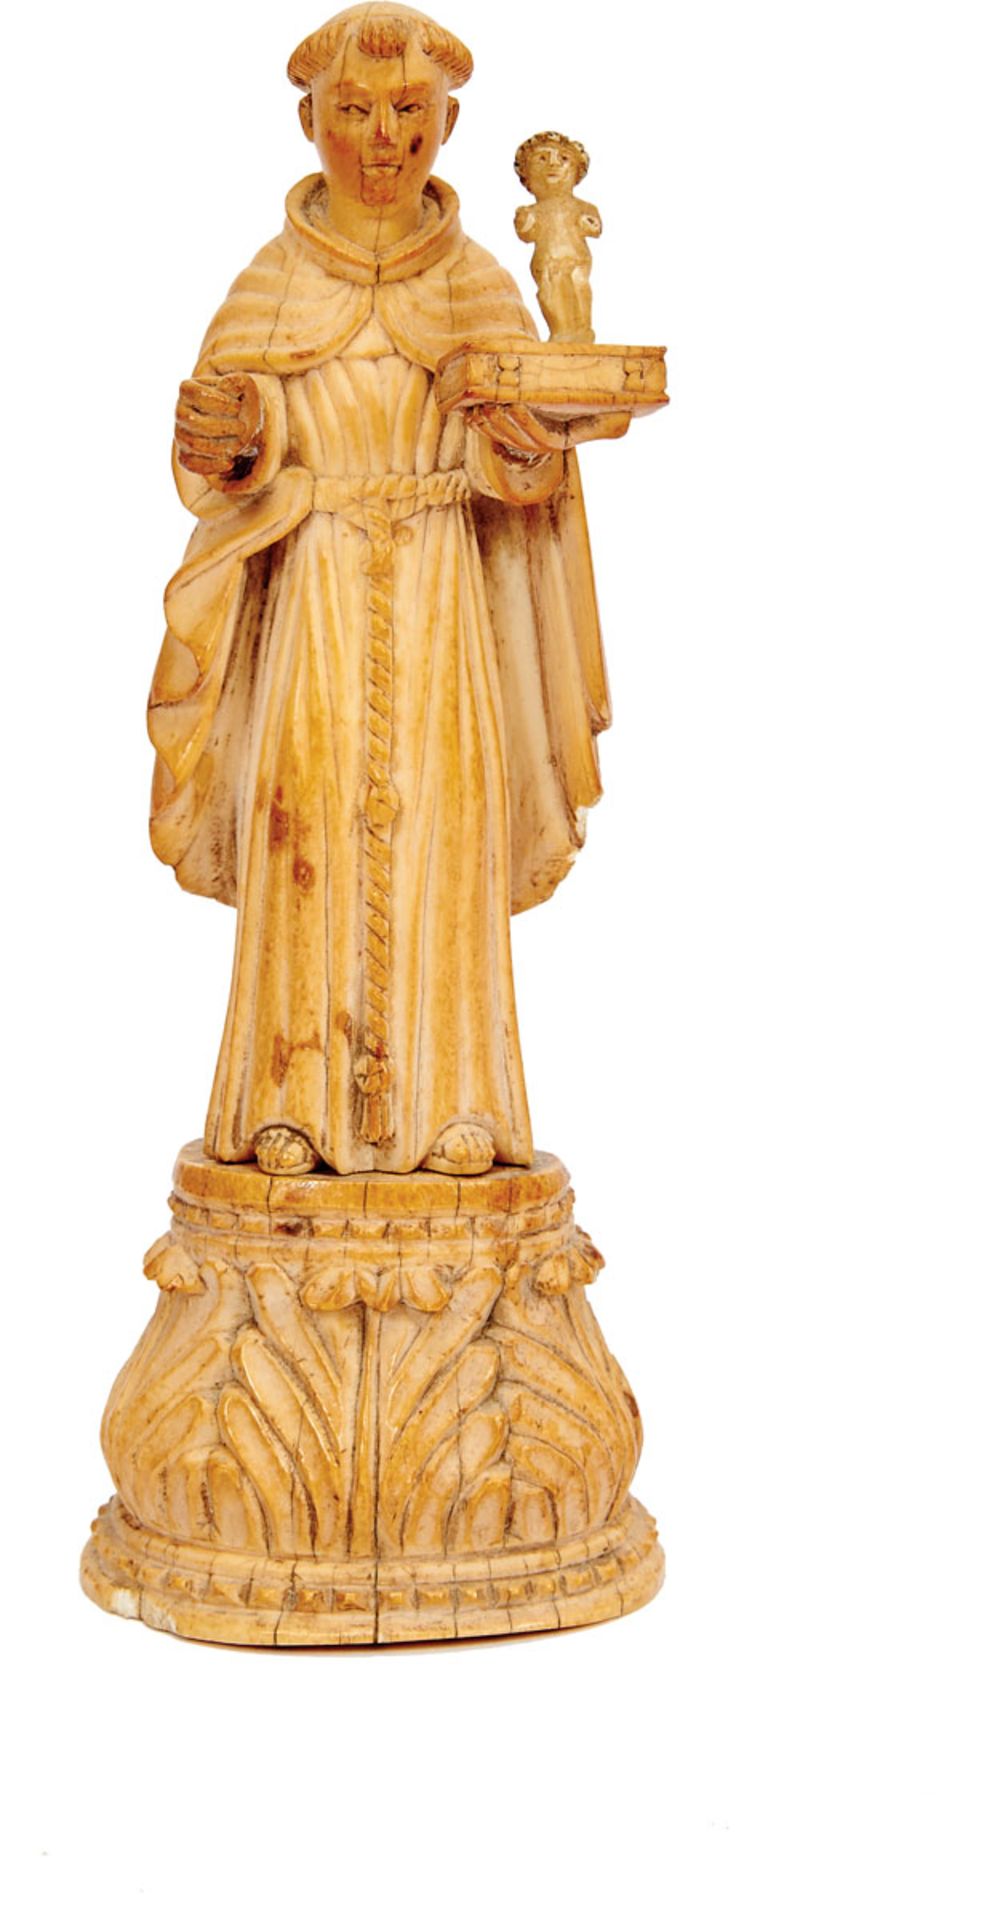 St. Anthony and Child Jesus, ivory sculpture, Indo-Portuguese, 17th/18th C., small fault at the